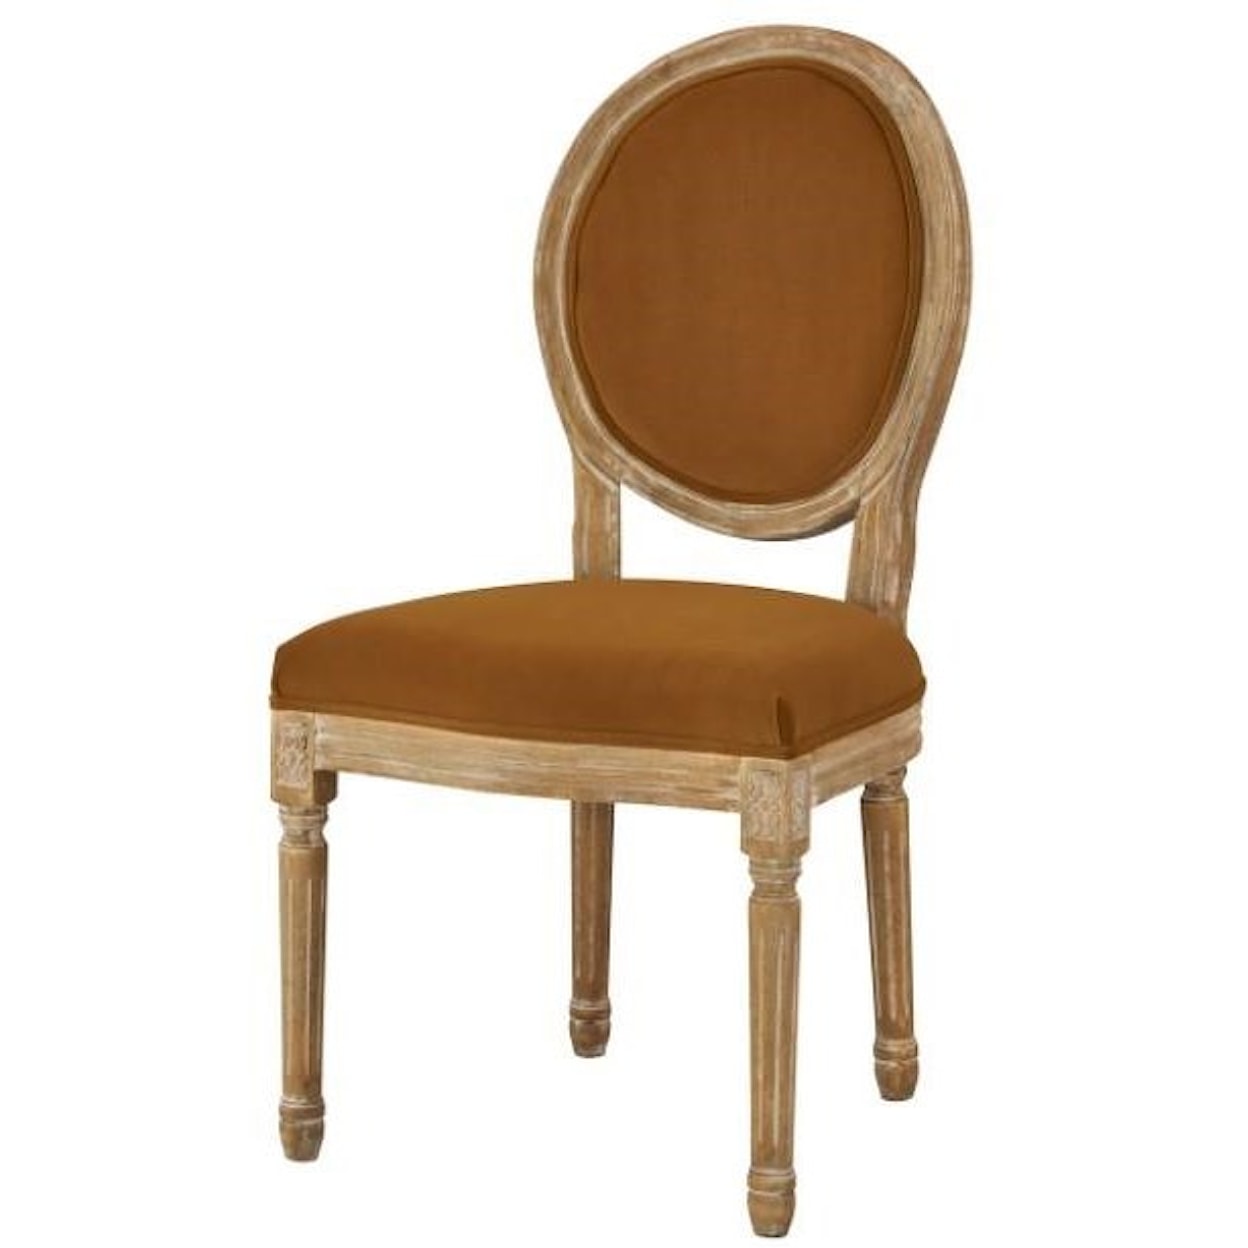 Forty West Designs Maxwell Round Maxwell Side Chair